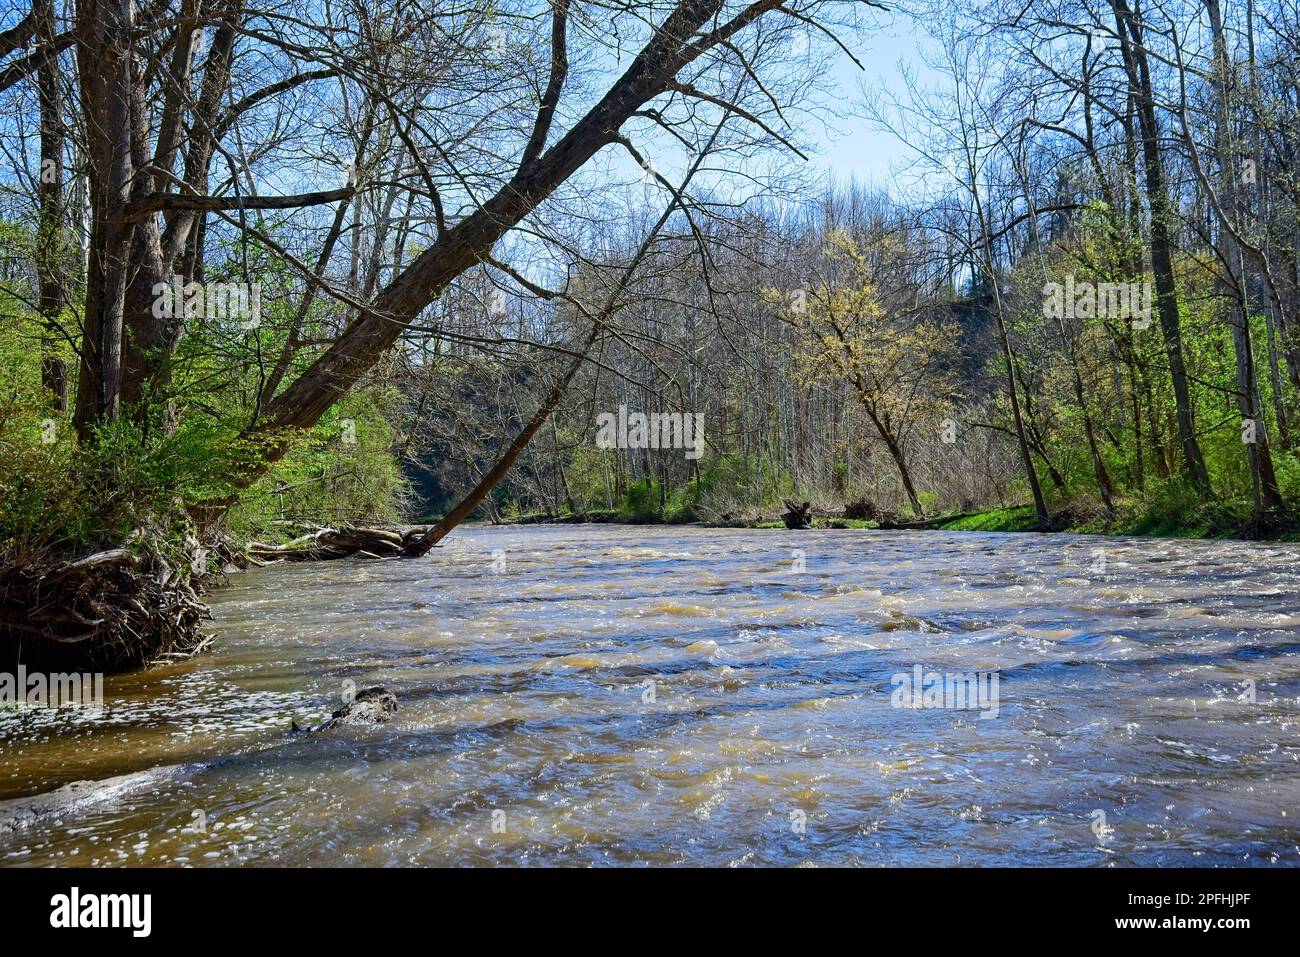 The Chagrin River in Northeast Ohio is cresting just short of flood stage after heavy rains in early spring. Stock Photo